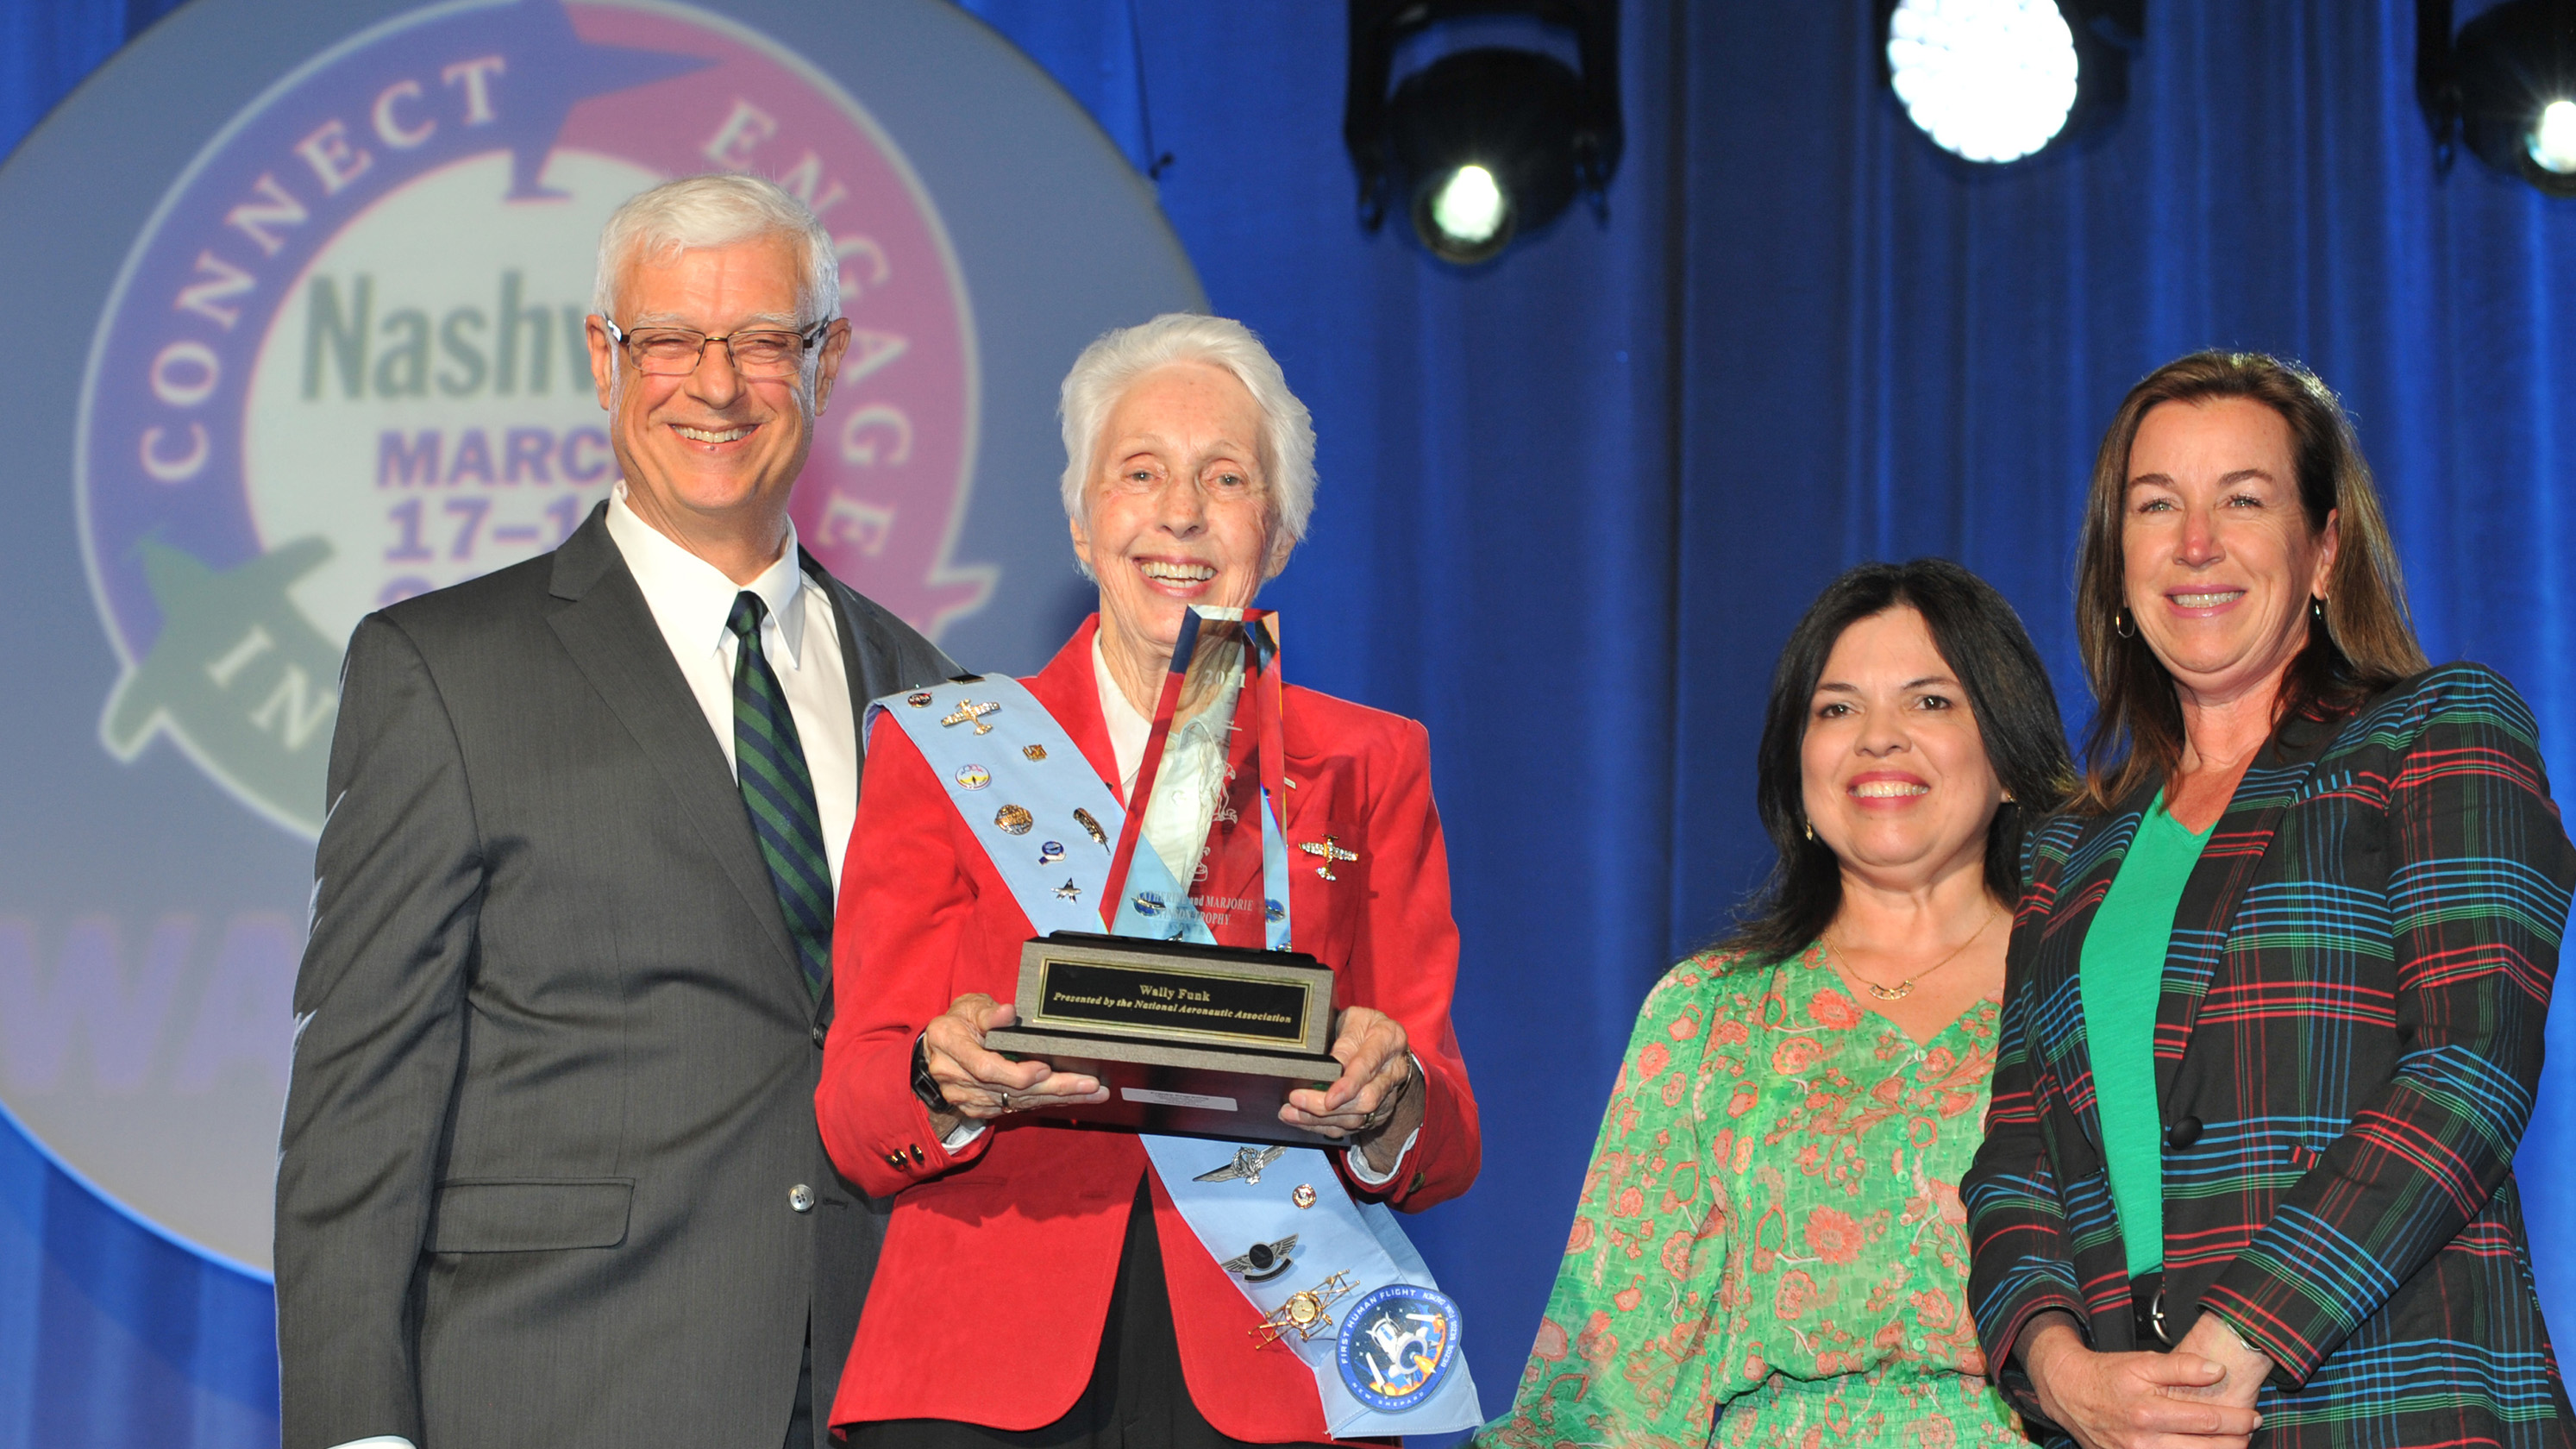 Wally Funk accepted the National Aeronautic Association's 2021 Katherine and Marjorie Stinson Trophy during a ceremony on March 17. Photo by Paula Grubb, courtesy of Women in Aviation International.